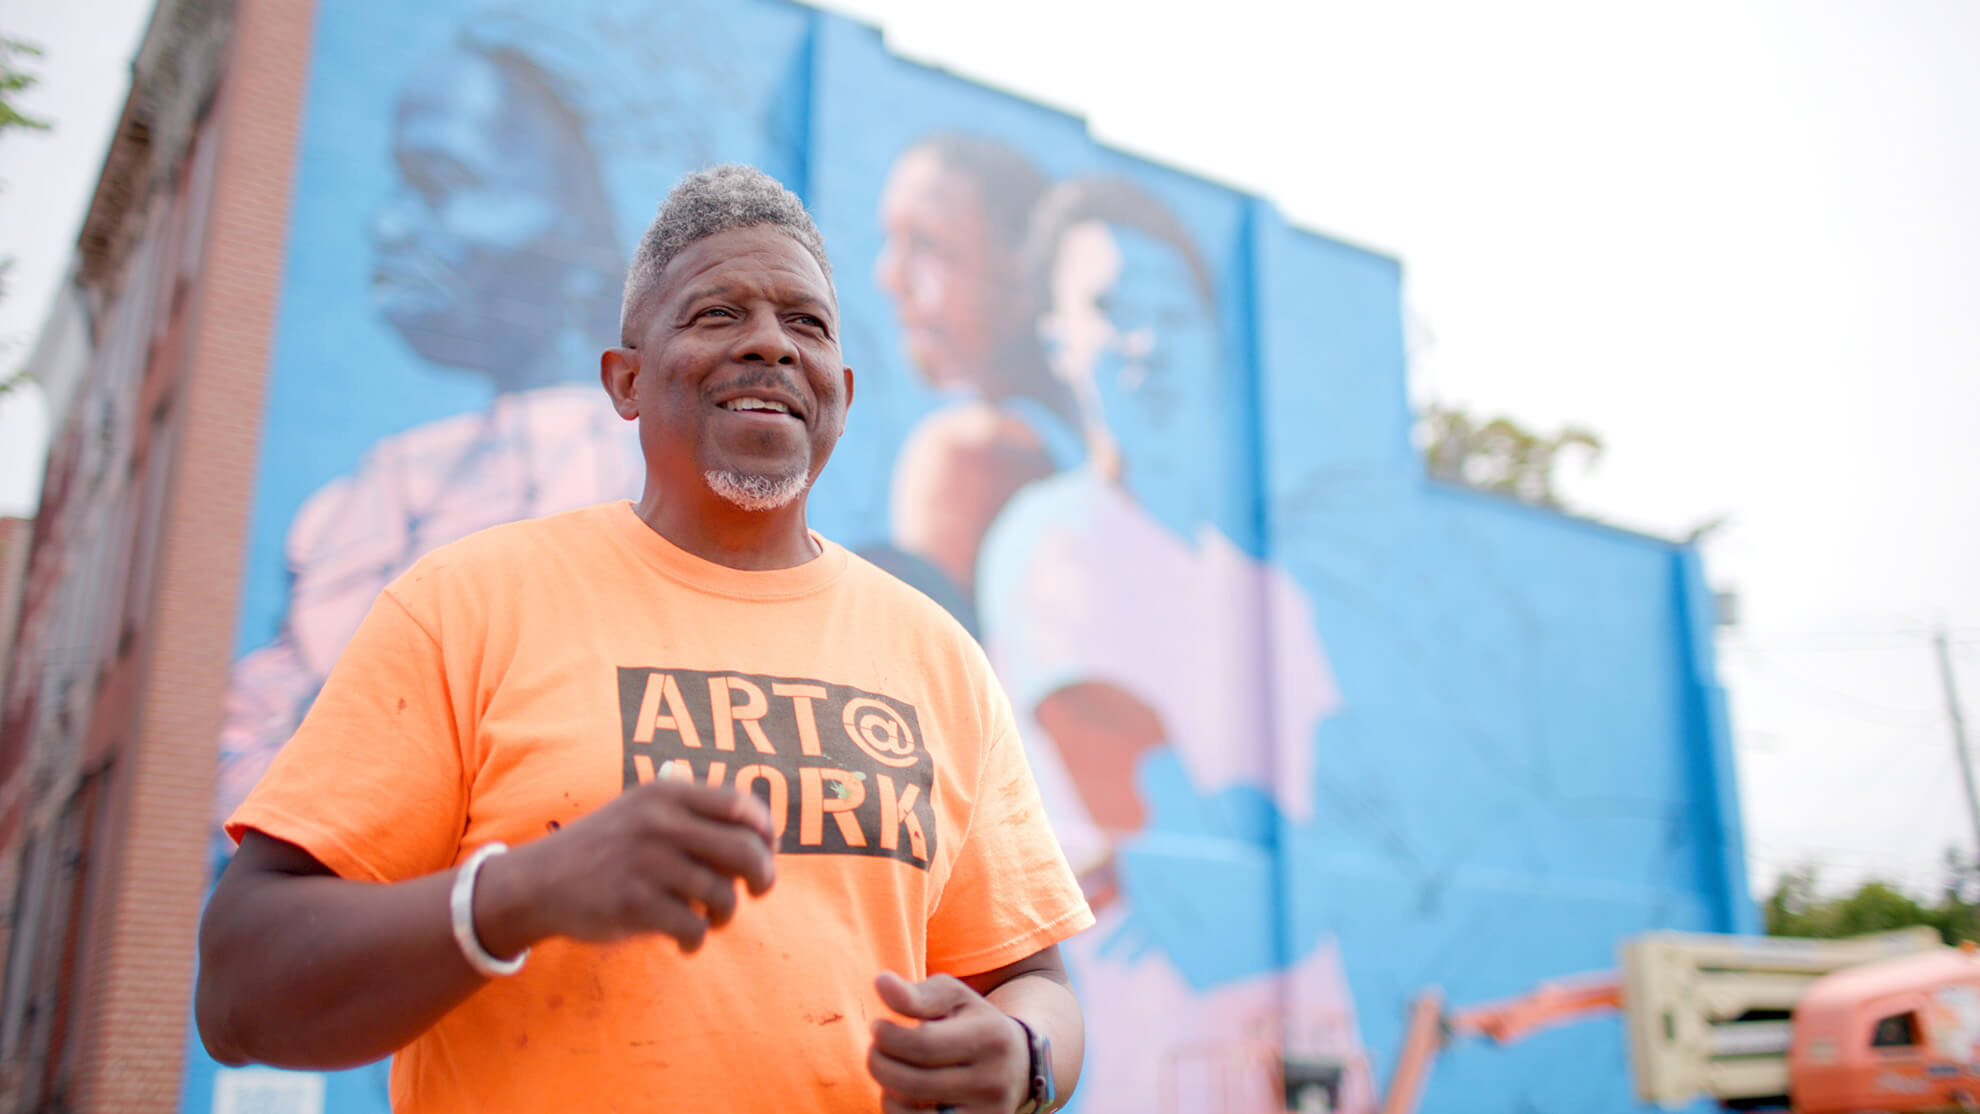 A portrait of the artist Ernest Shaw smiling and describing his work. He is a middle-aged Black man with a greying fade and neat beard. The orange shirt he wears has the phrase "Art @ Work"